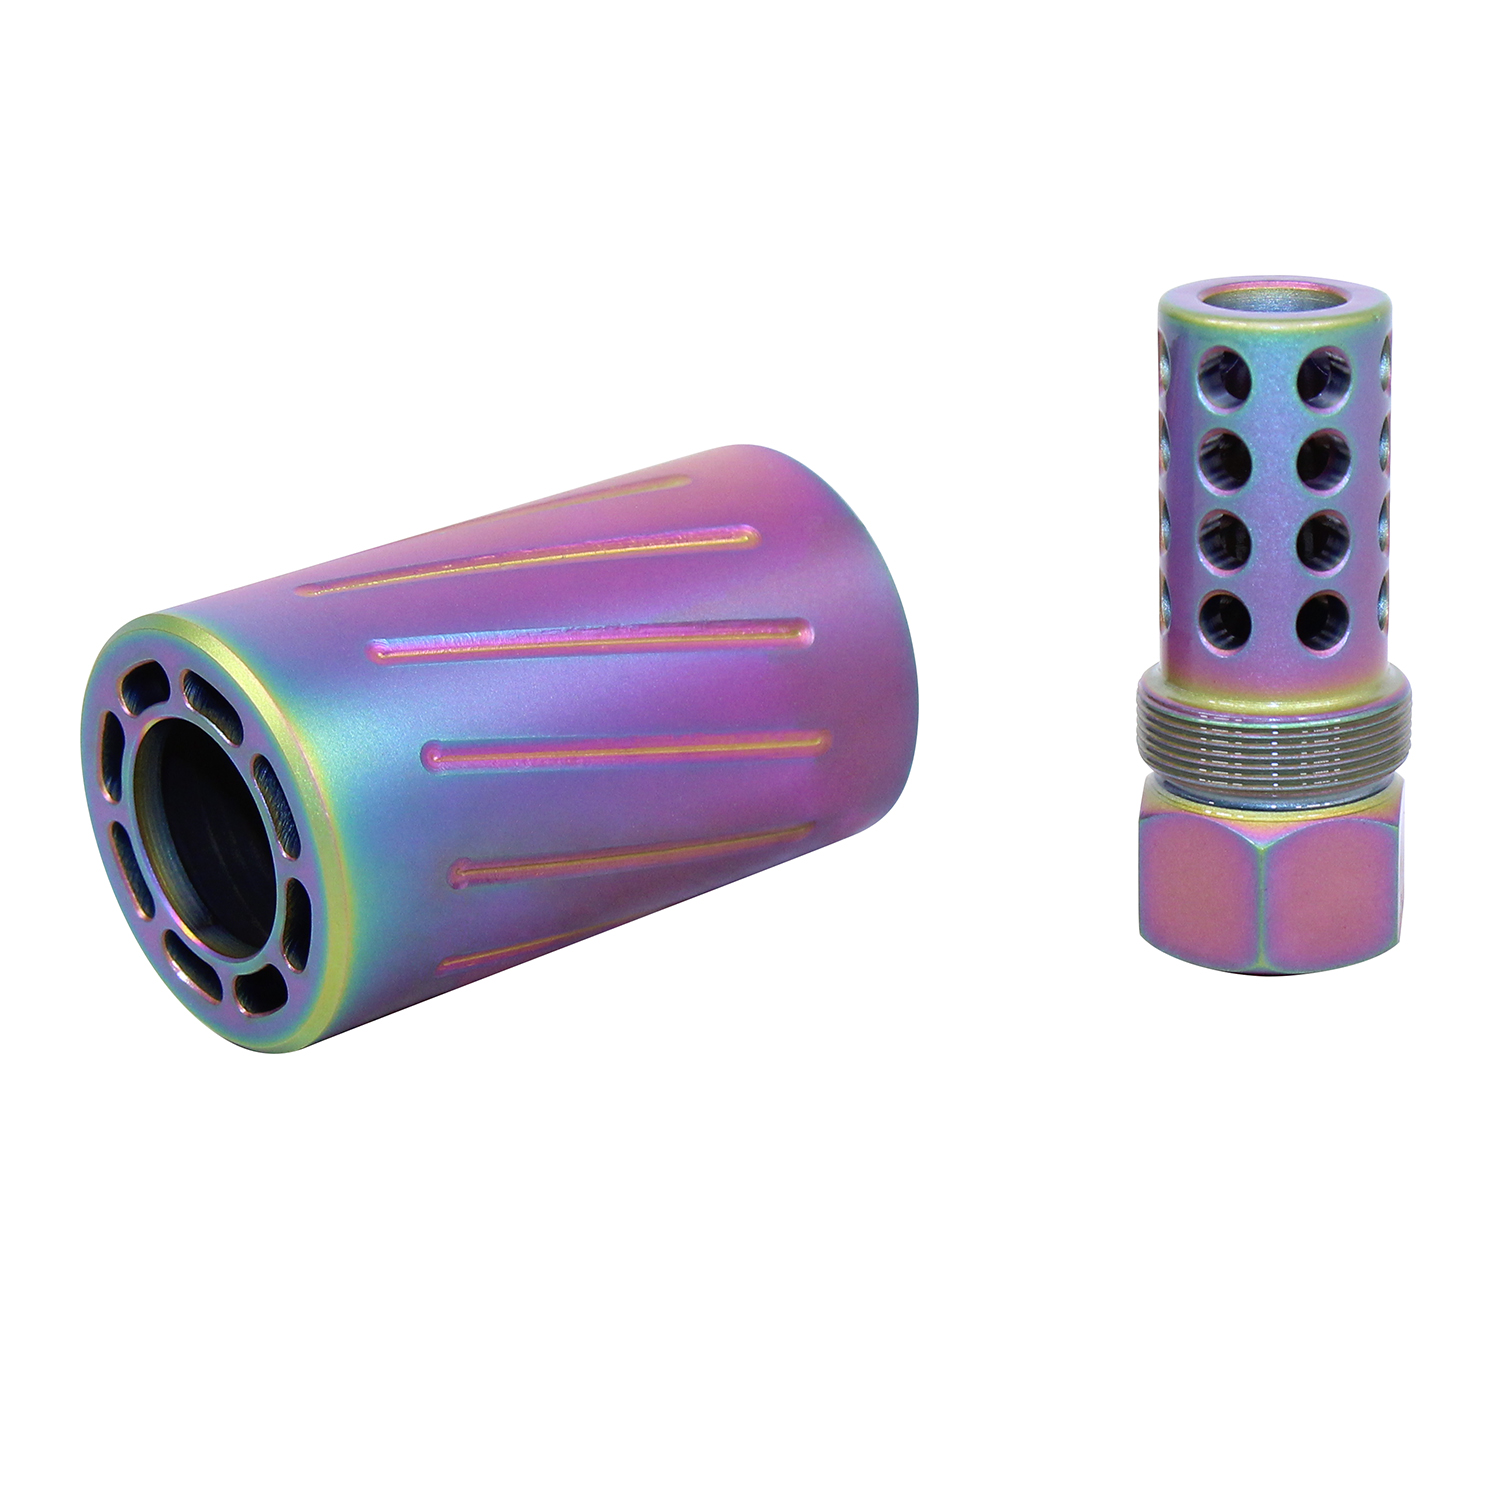 AR 300 Blackout muzzle compensator and QD blast shield with a rainbow PVD finish